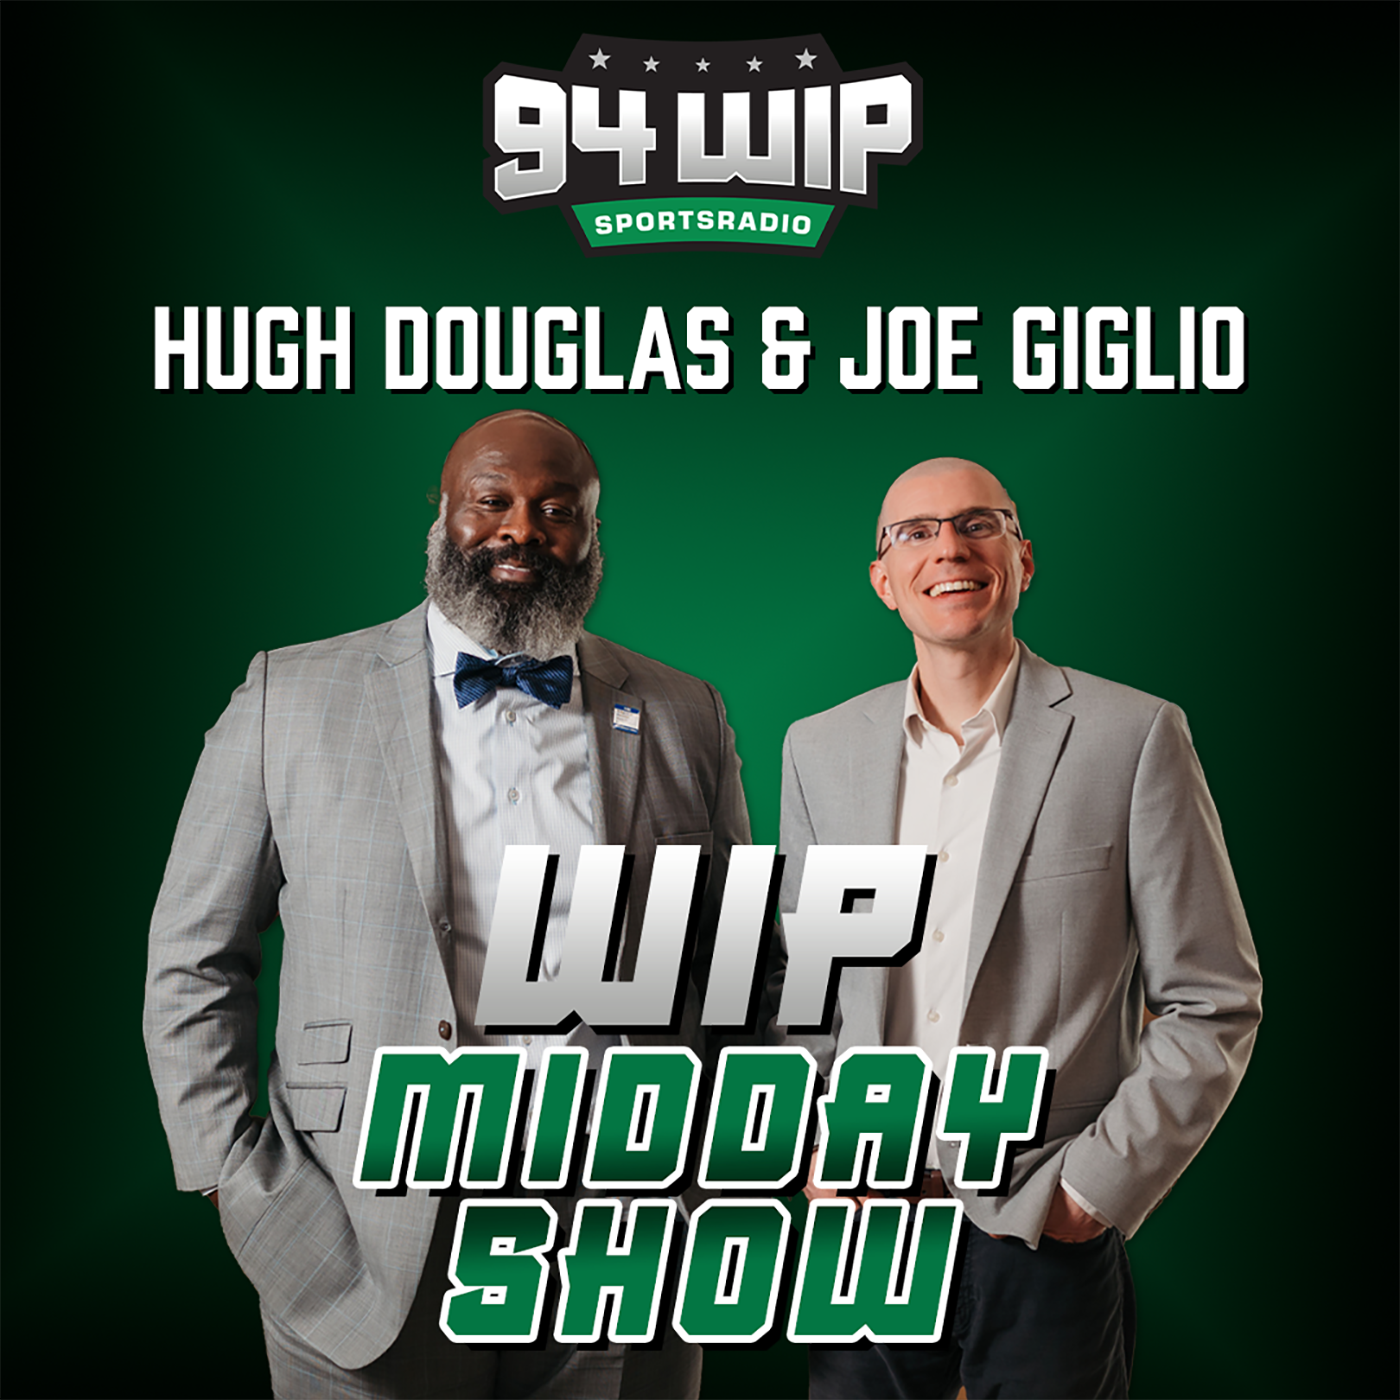 Full Show: Best Phillies team you've ever seen? Jimmy Butler return? And more!